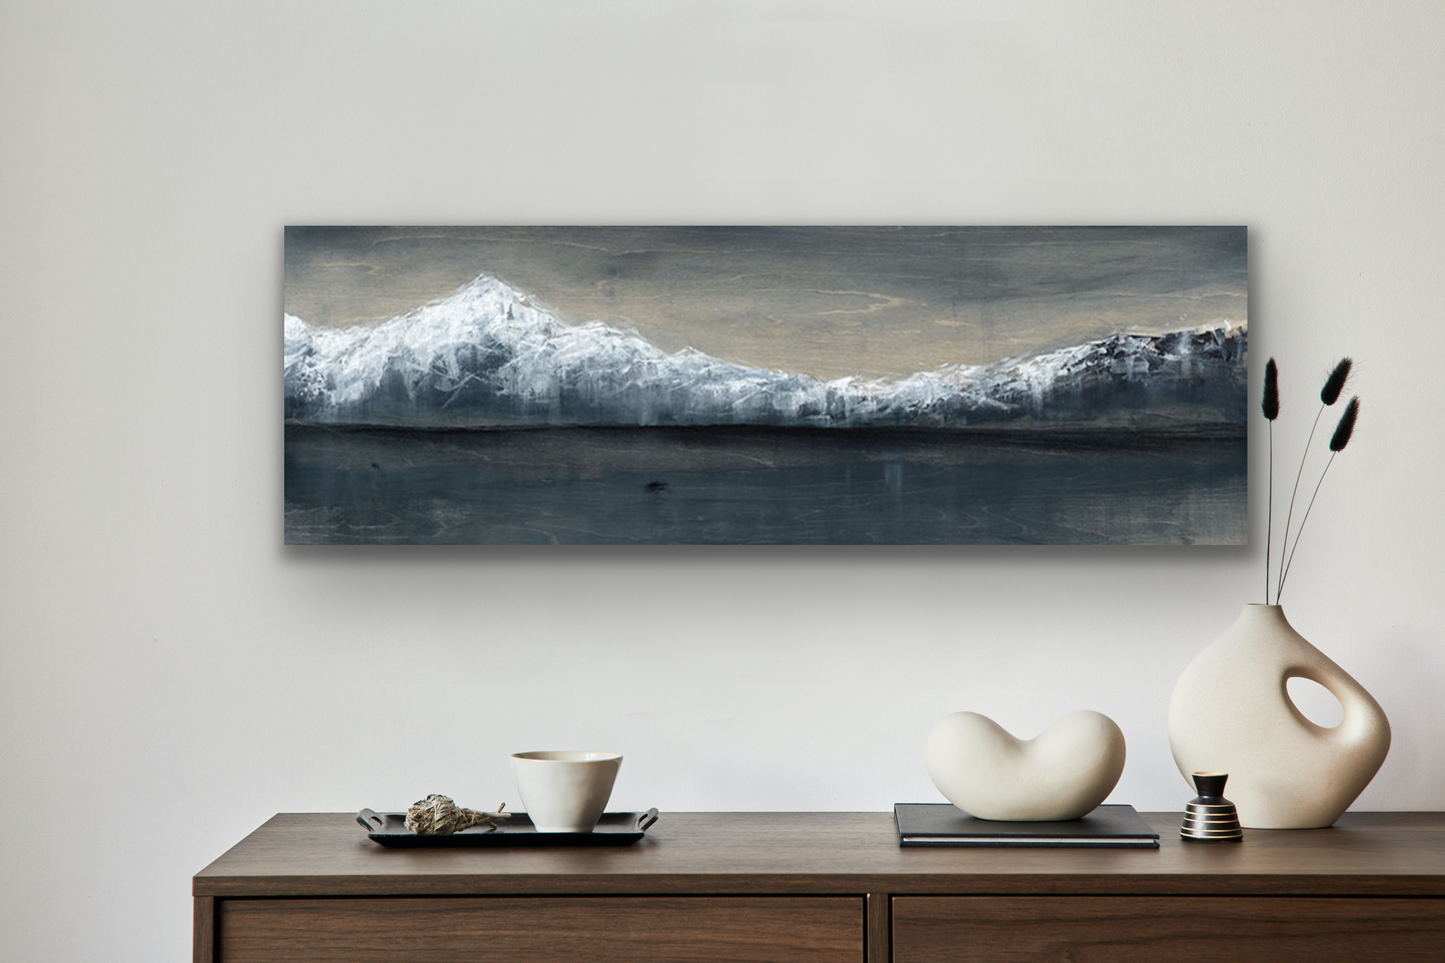 "Snow Capped Mountains" is long panoramic work of art.